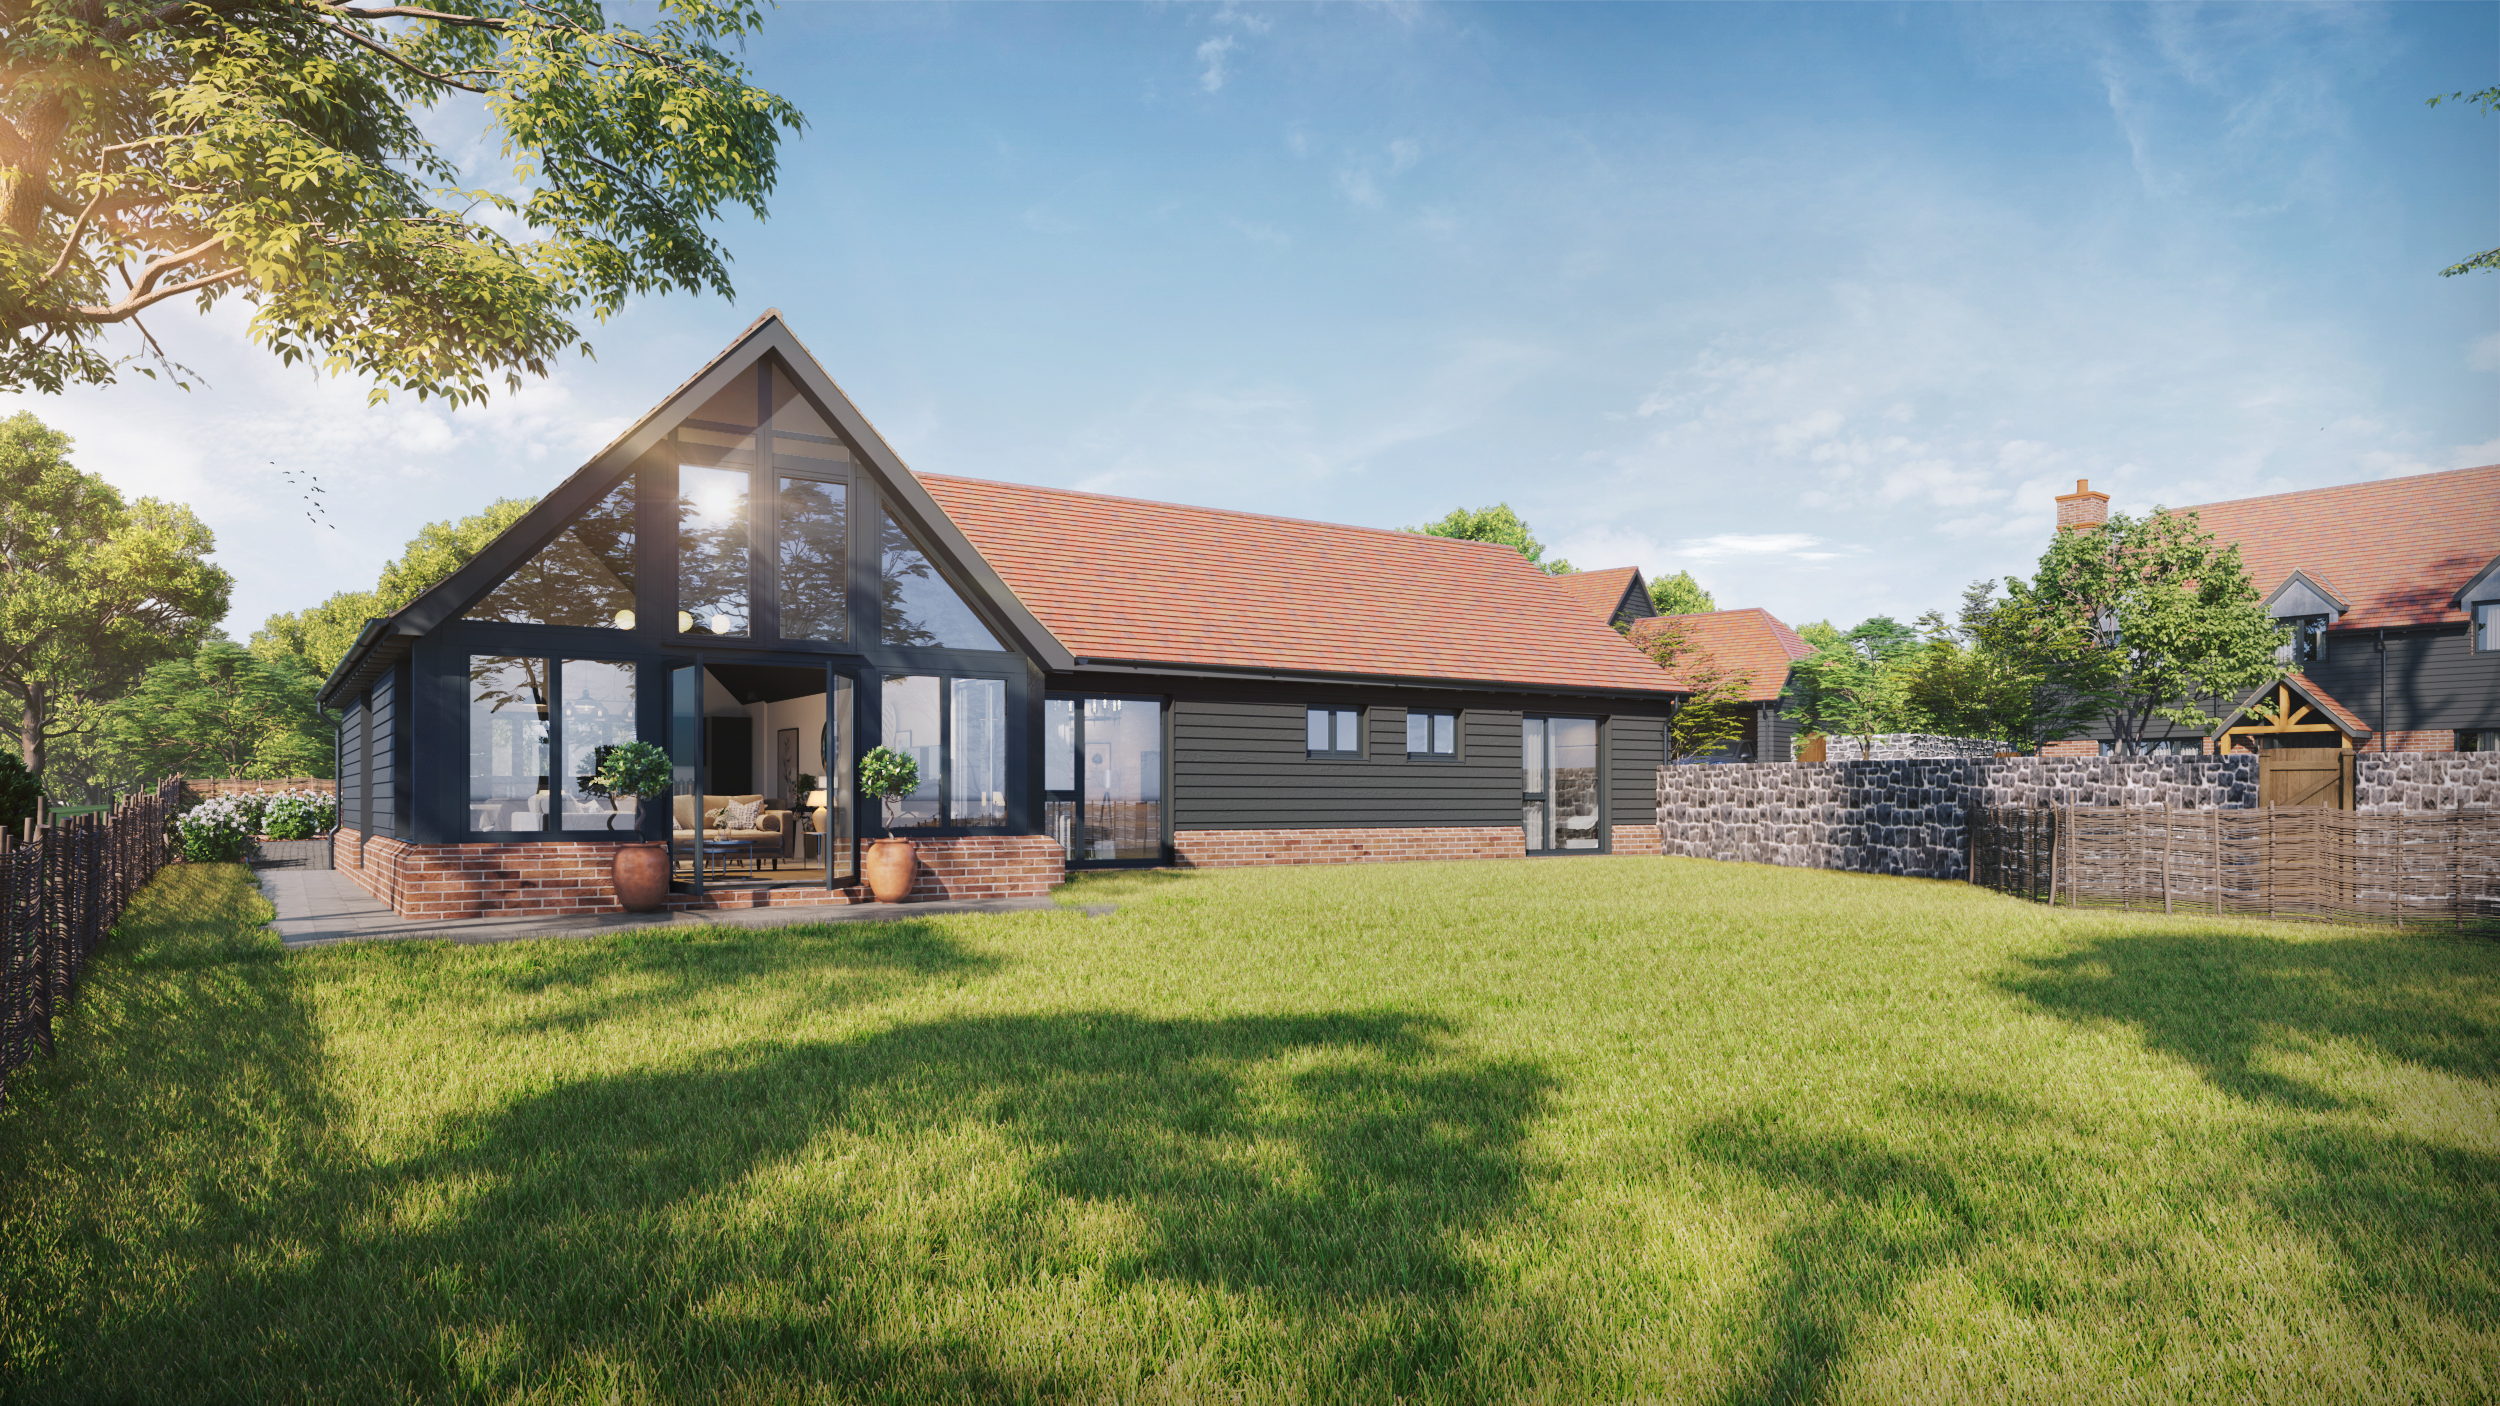 CGI of the rear garden of a bungalow with red roof tiles, and grey cladding. A large glass window to one side.